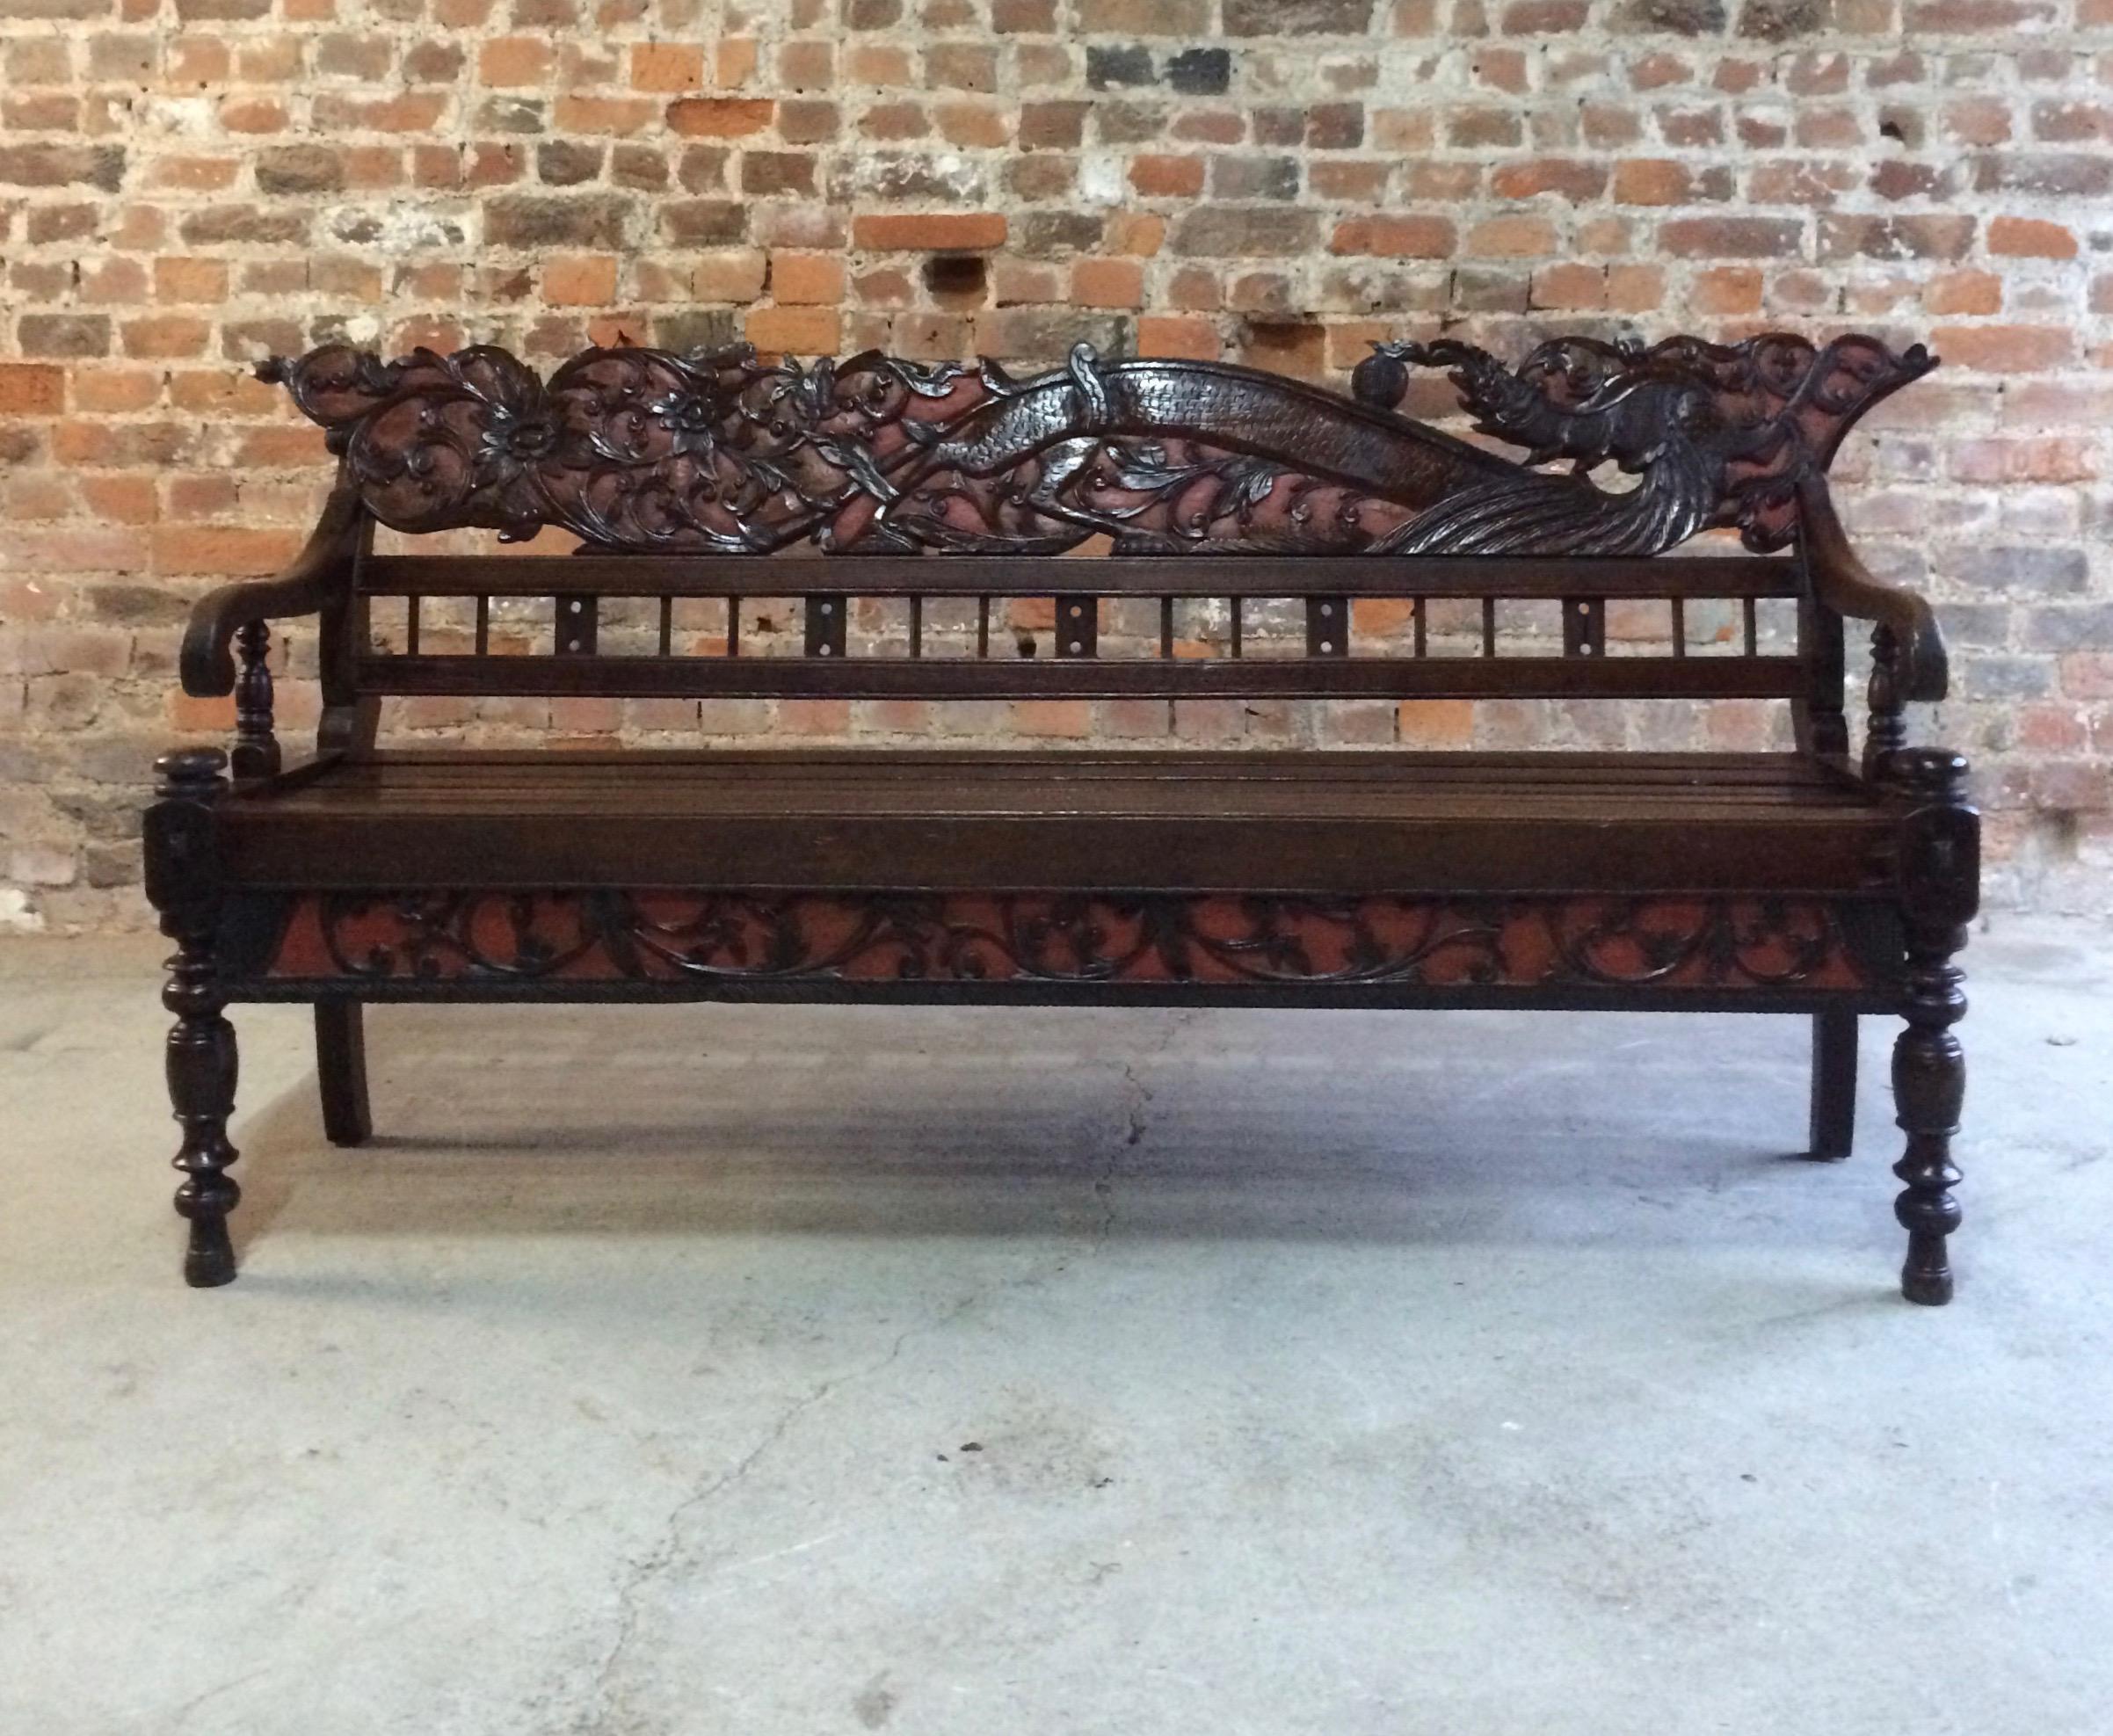 Hand-Carved Antique Chinese Hall Seat Bench Heavily Carved Qing Dynasty 19th Century 1860